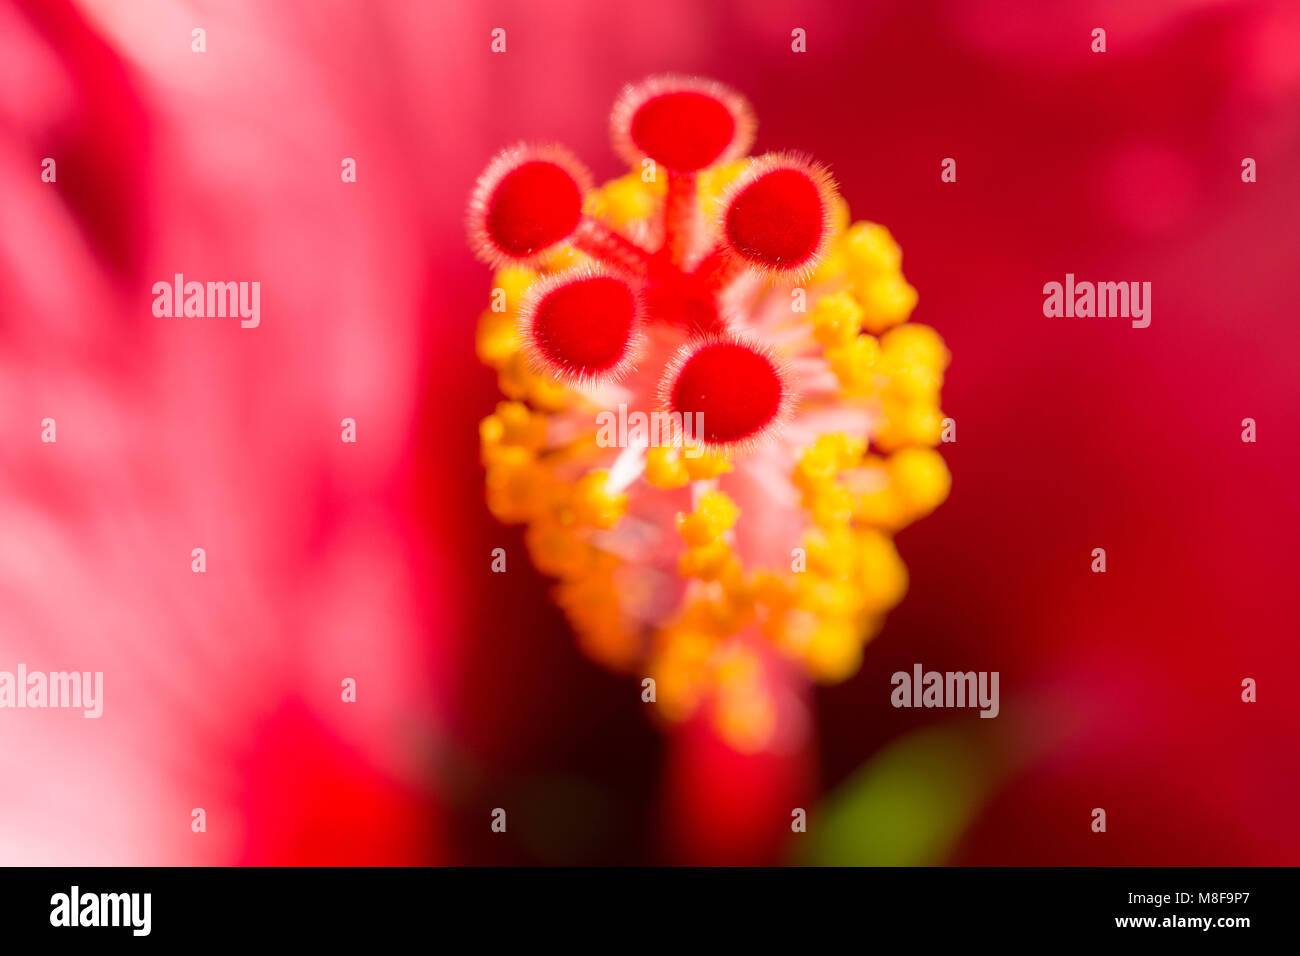 Blurred floral background with Hibiskus red flower. Macro stock photo with selective focus point and shallow DoF. Stock Photo